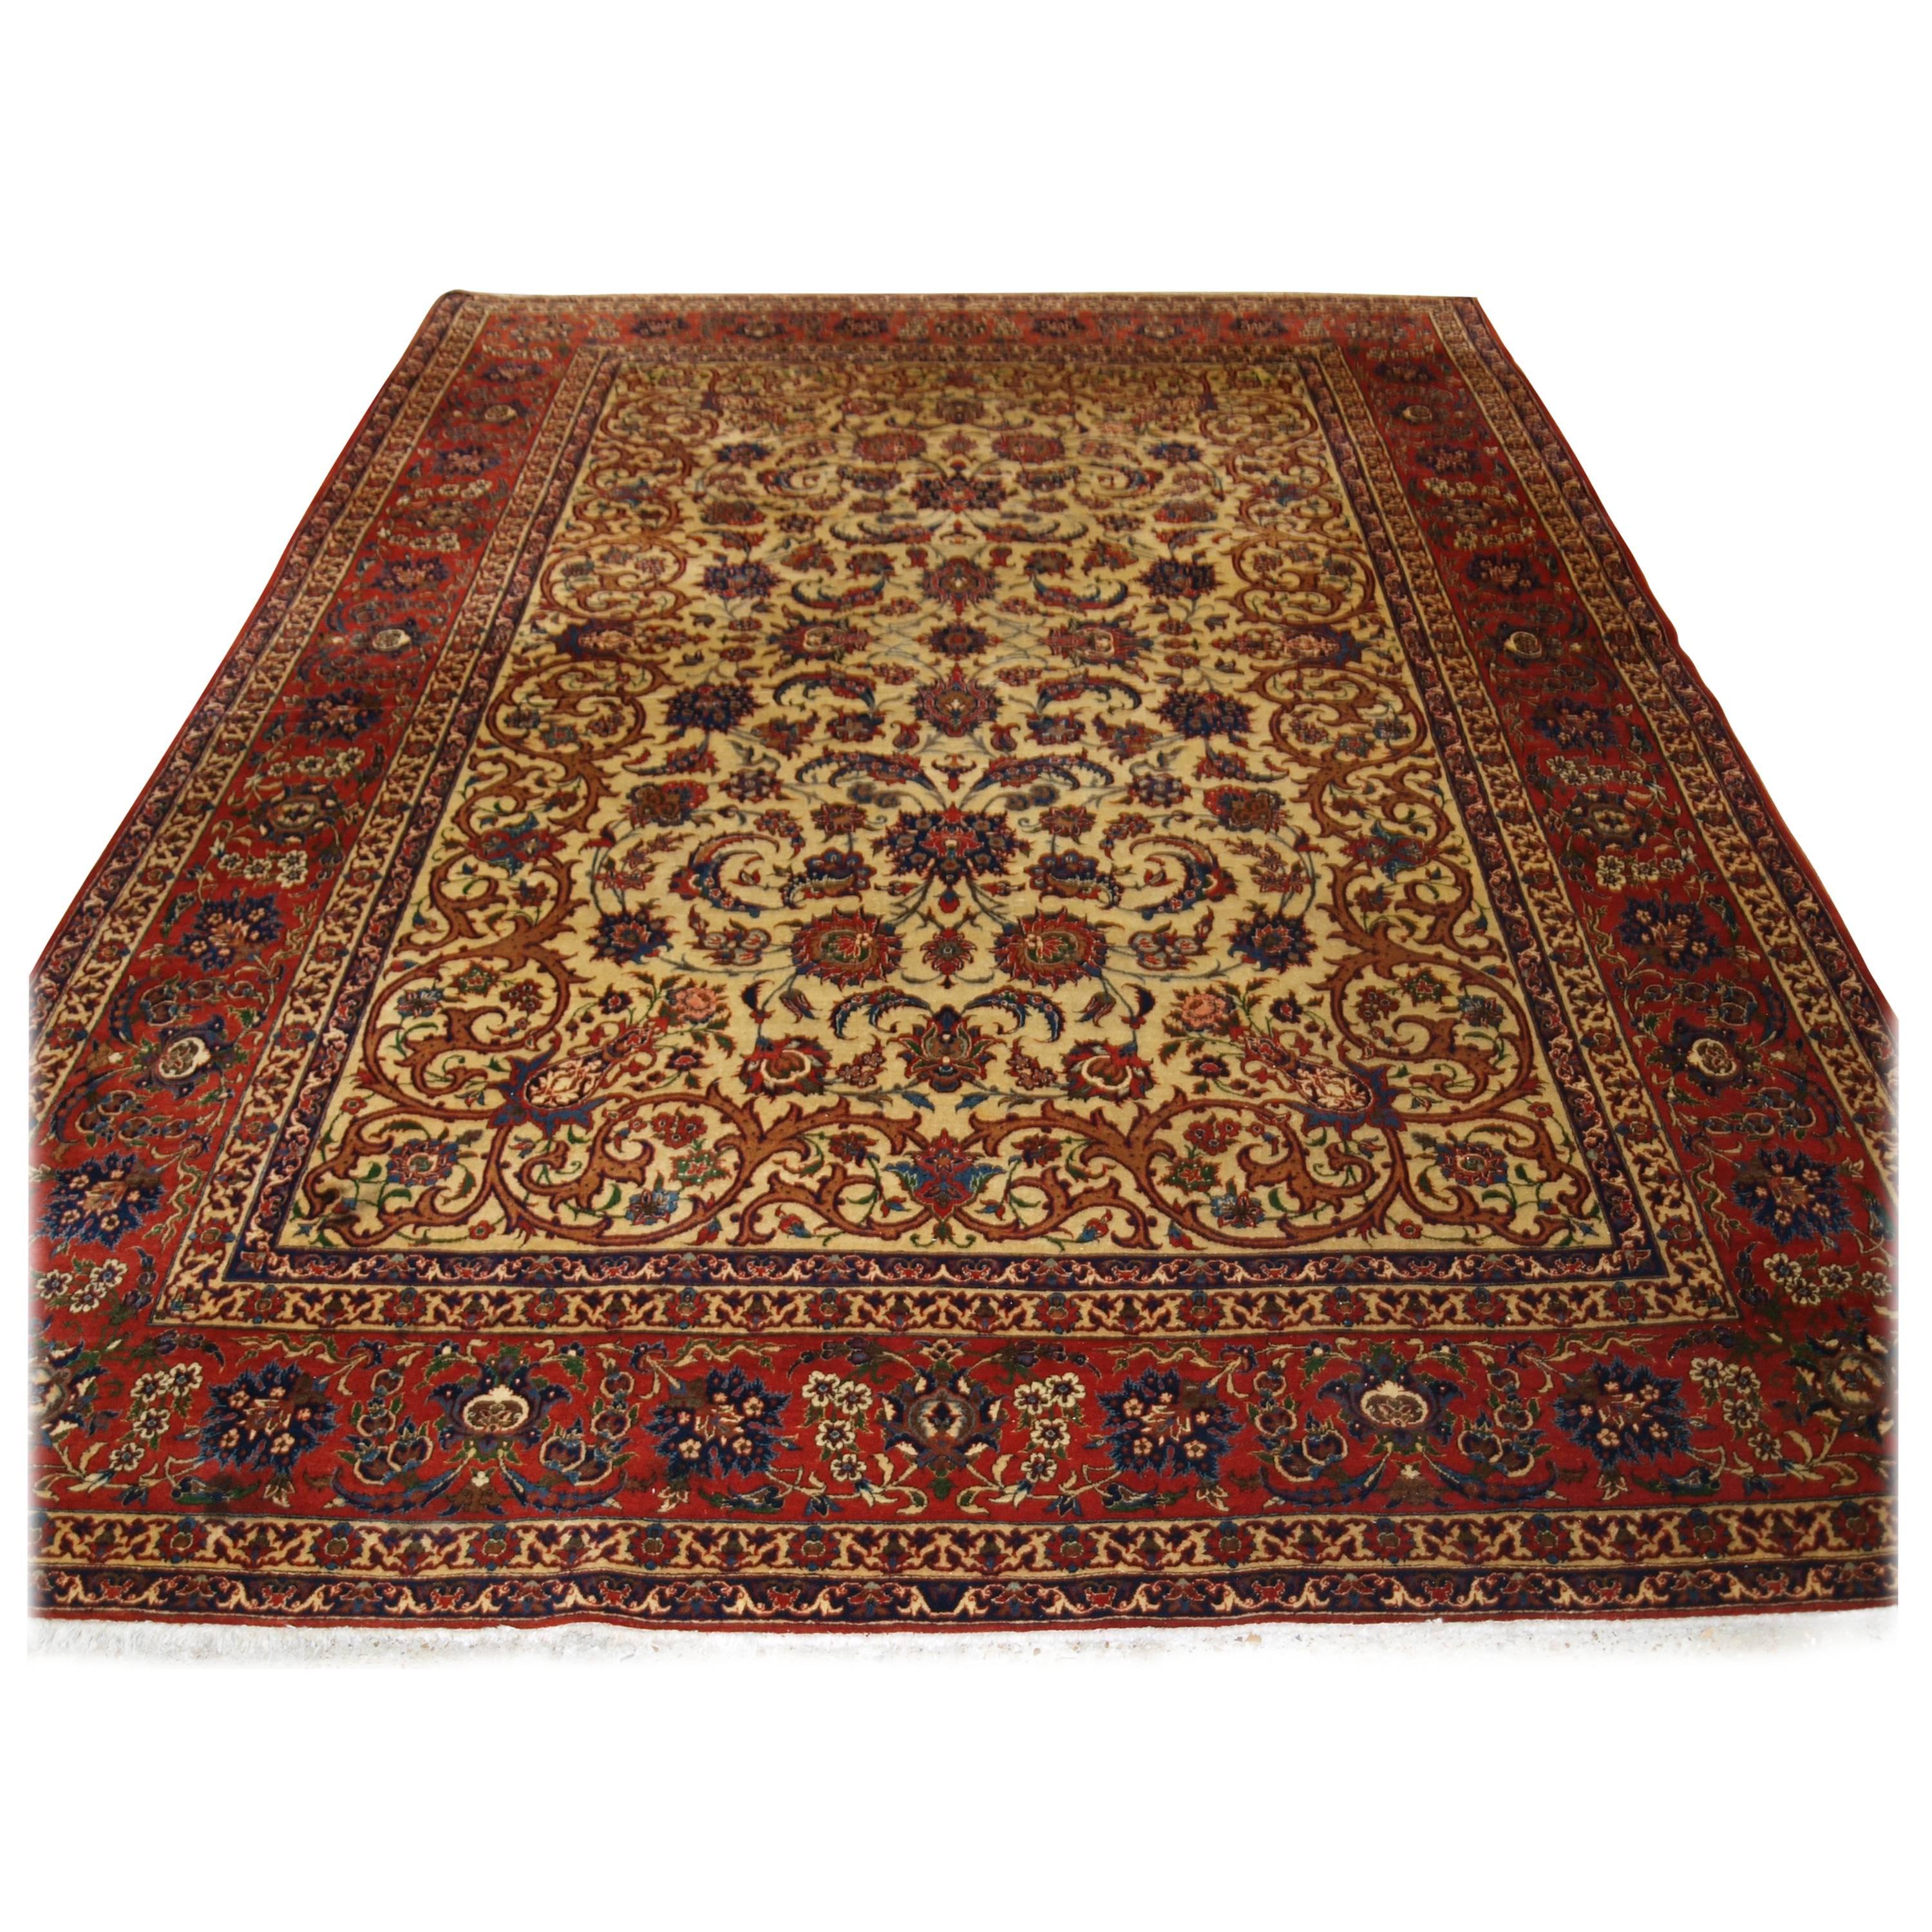 Old Persian Isfahan Carpet, of Superb Classic Design, Outstanding Color For Sale